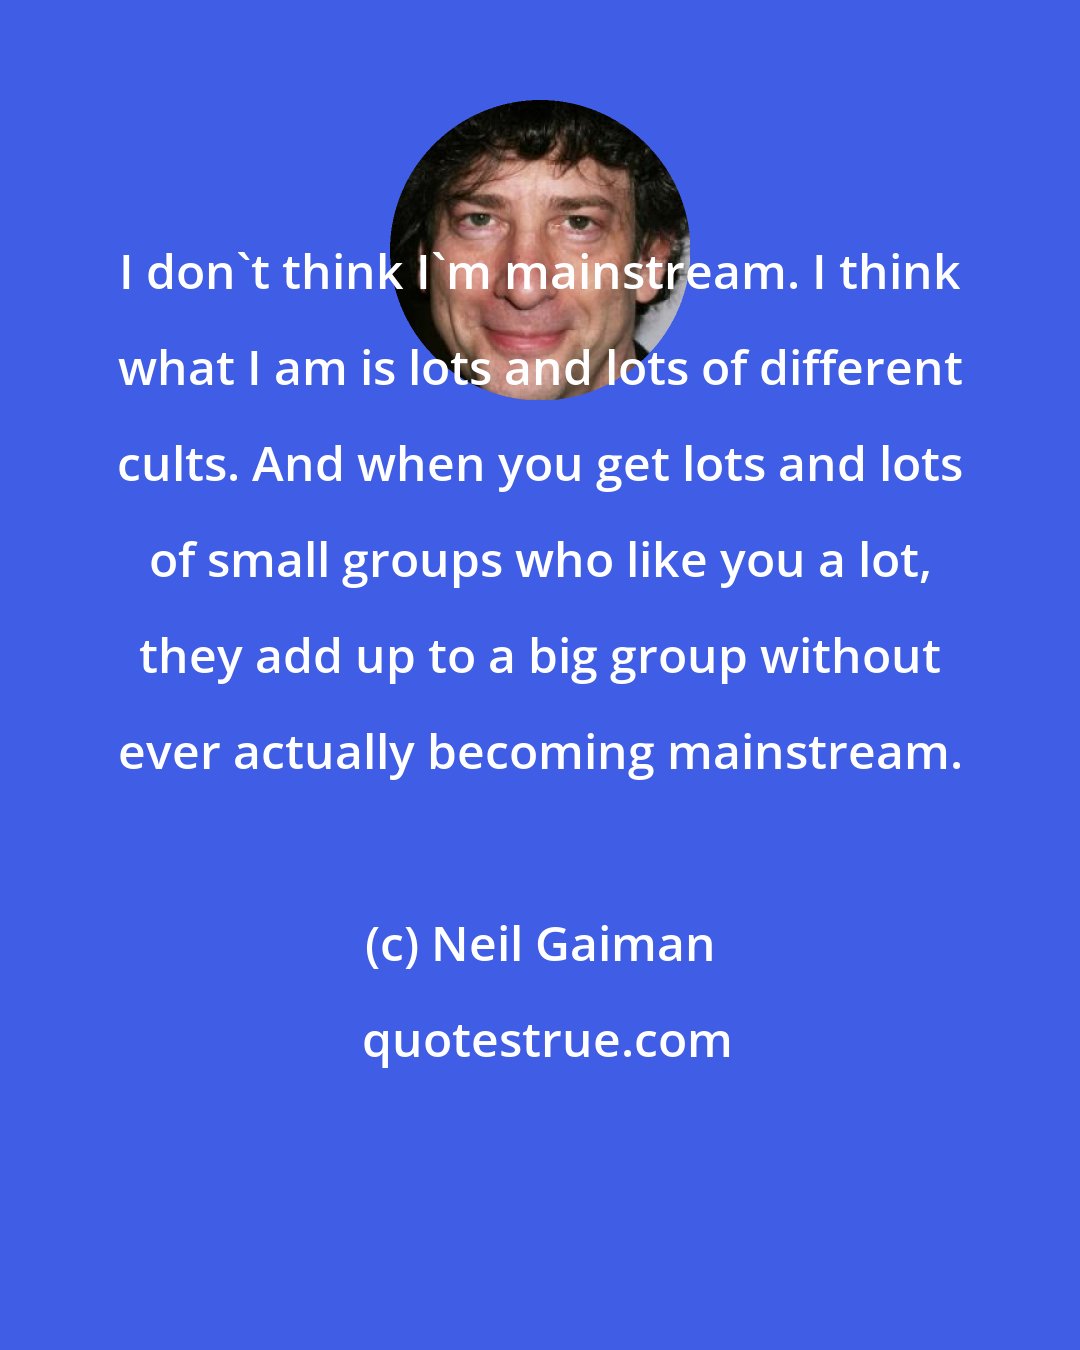 Neil Gaiman: I don't think I'm mainstream. I think what I am is lots and lots of different cults. And when you get lots and lots of small groups who like you a lot, they add up to a big group without ever actually becoming mainstream.